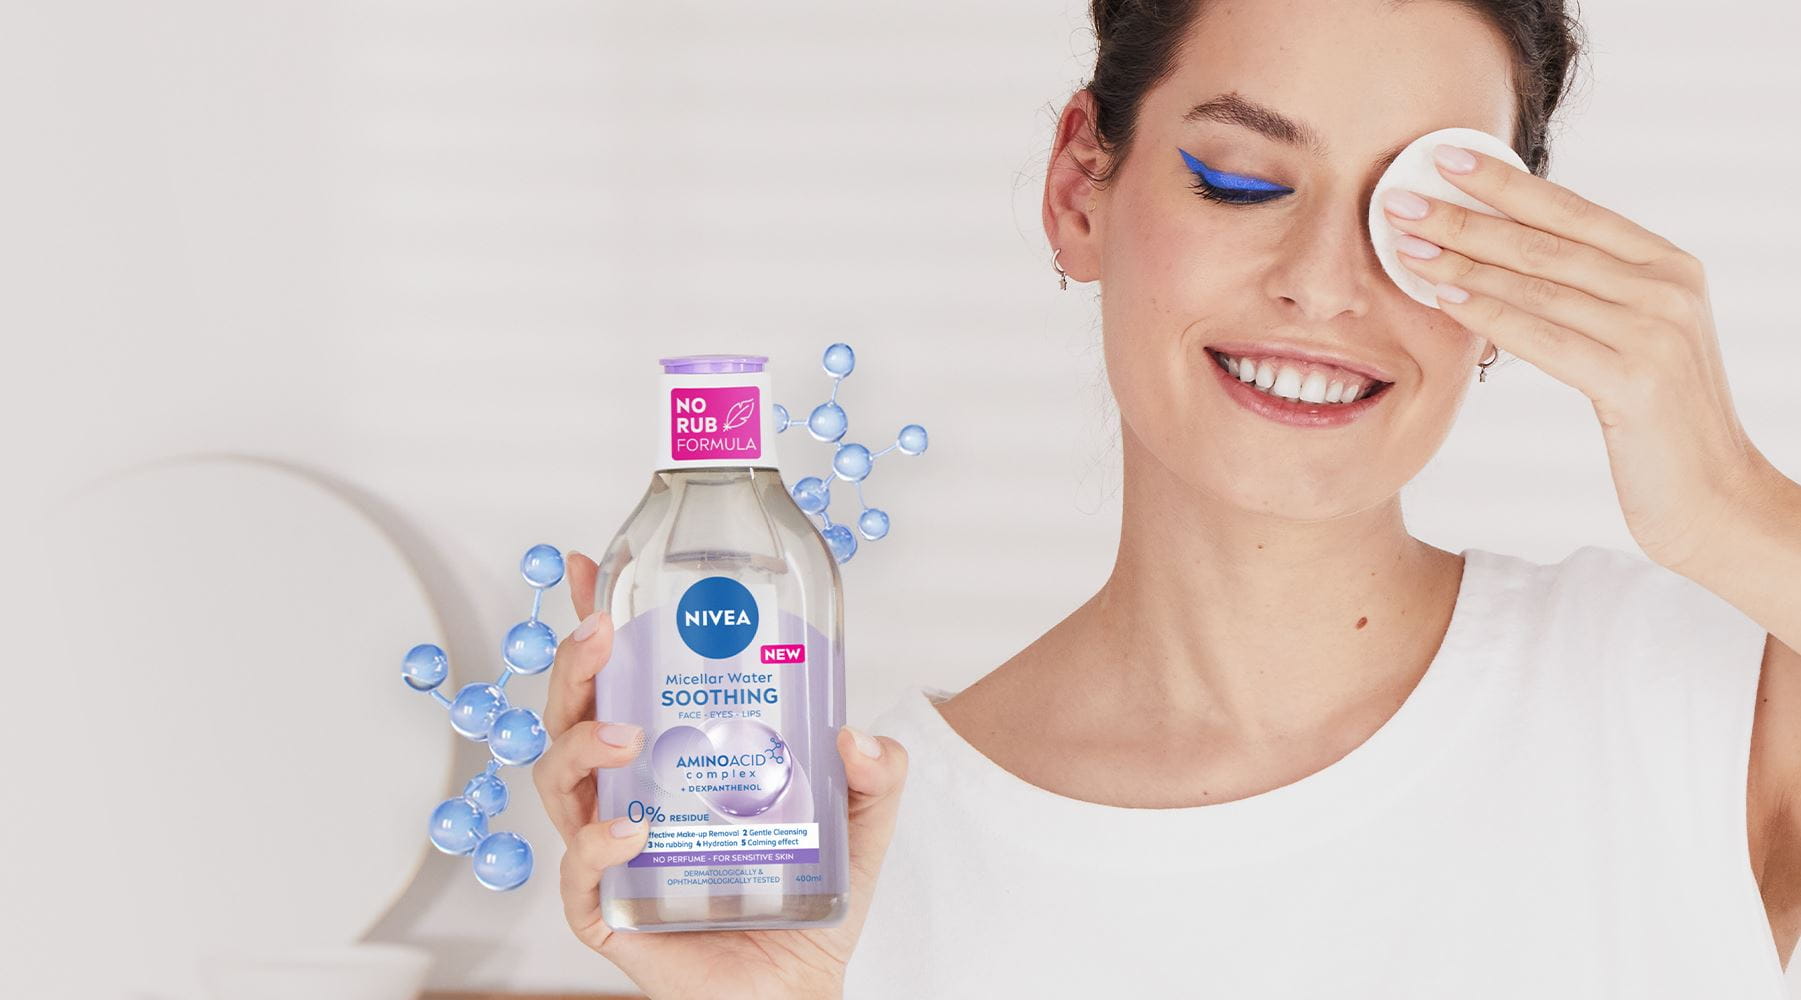 A woman has removed heavy blue eye make-up with the NEW NIVEA Micellar Water and shows the cotton pad.